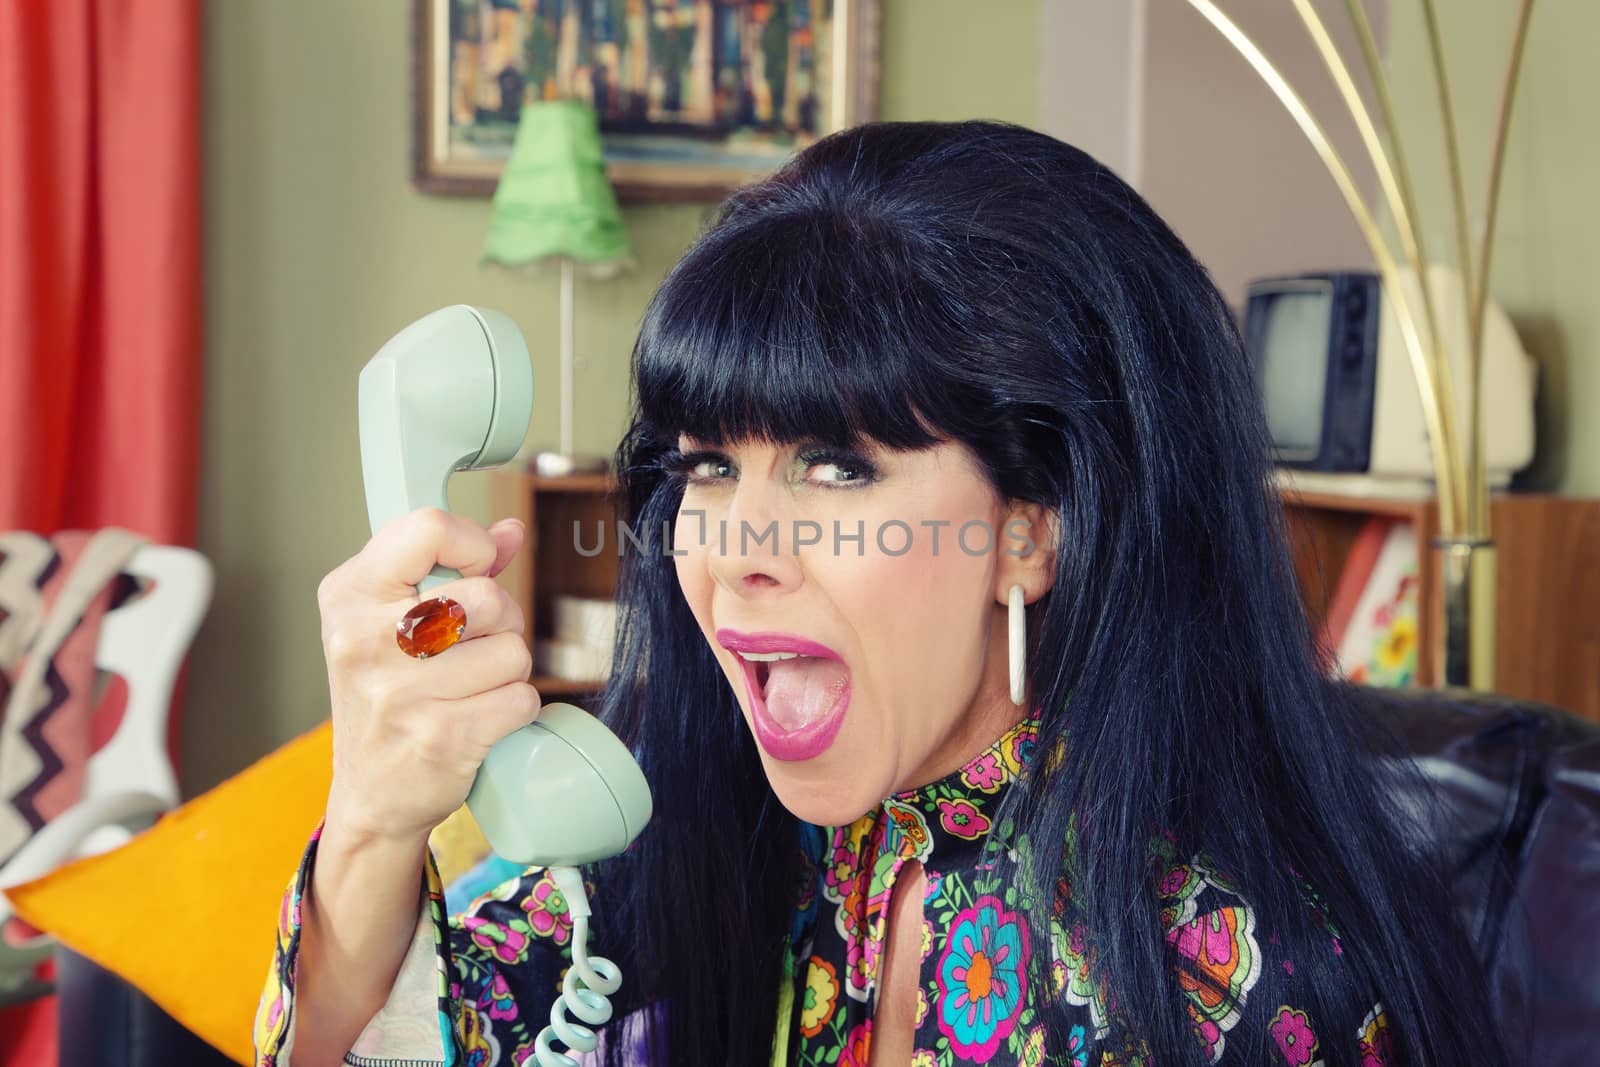 Woman Yelling at Phone by Creatista